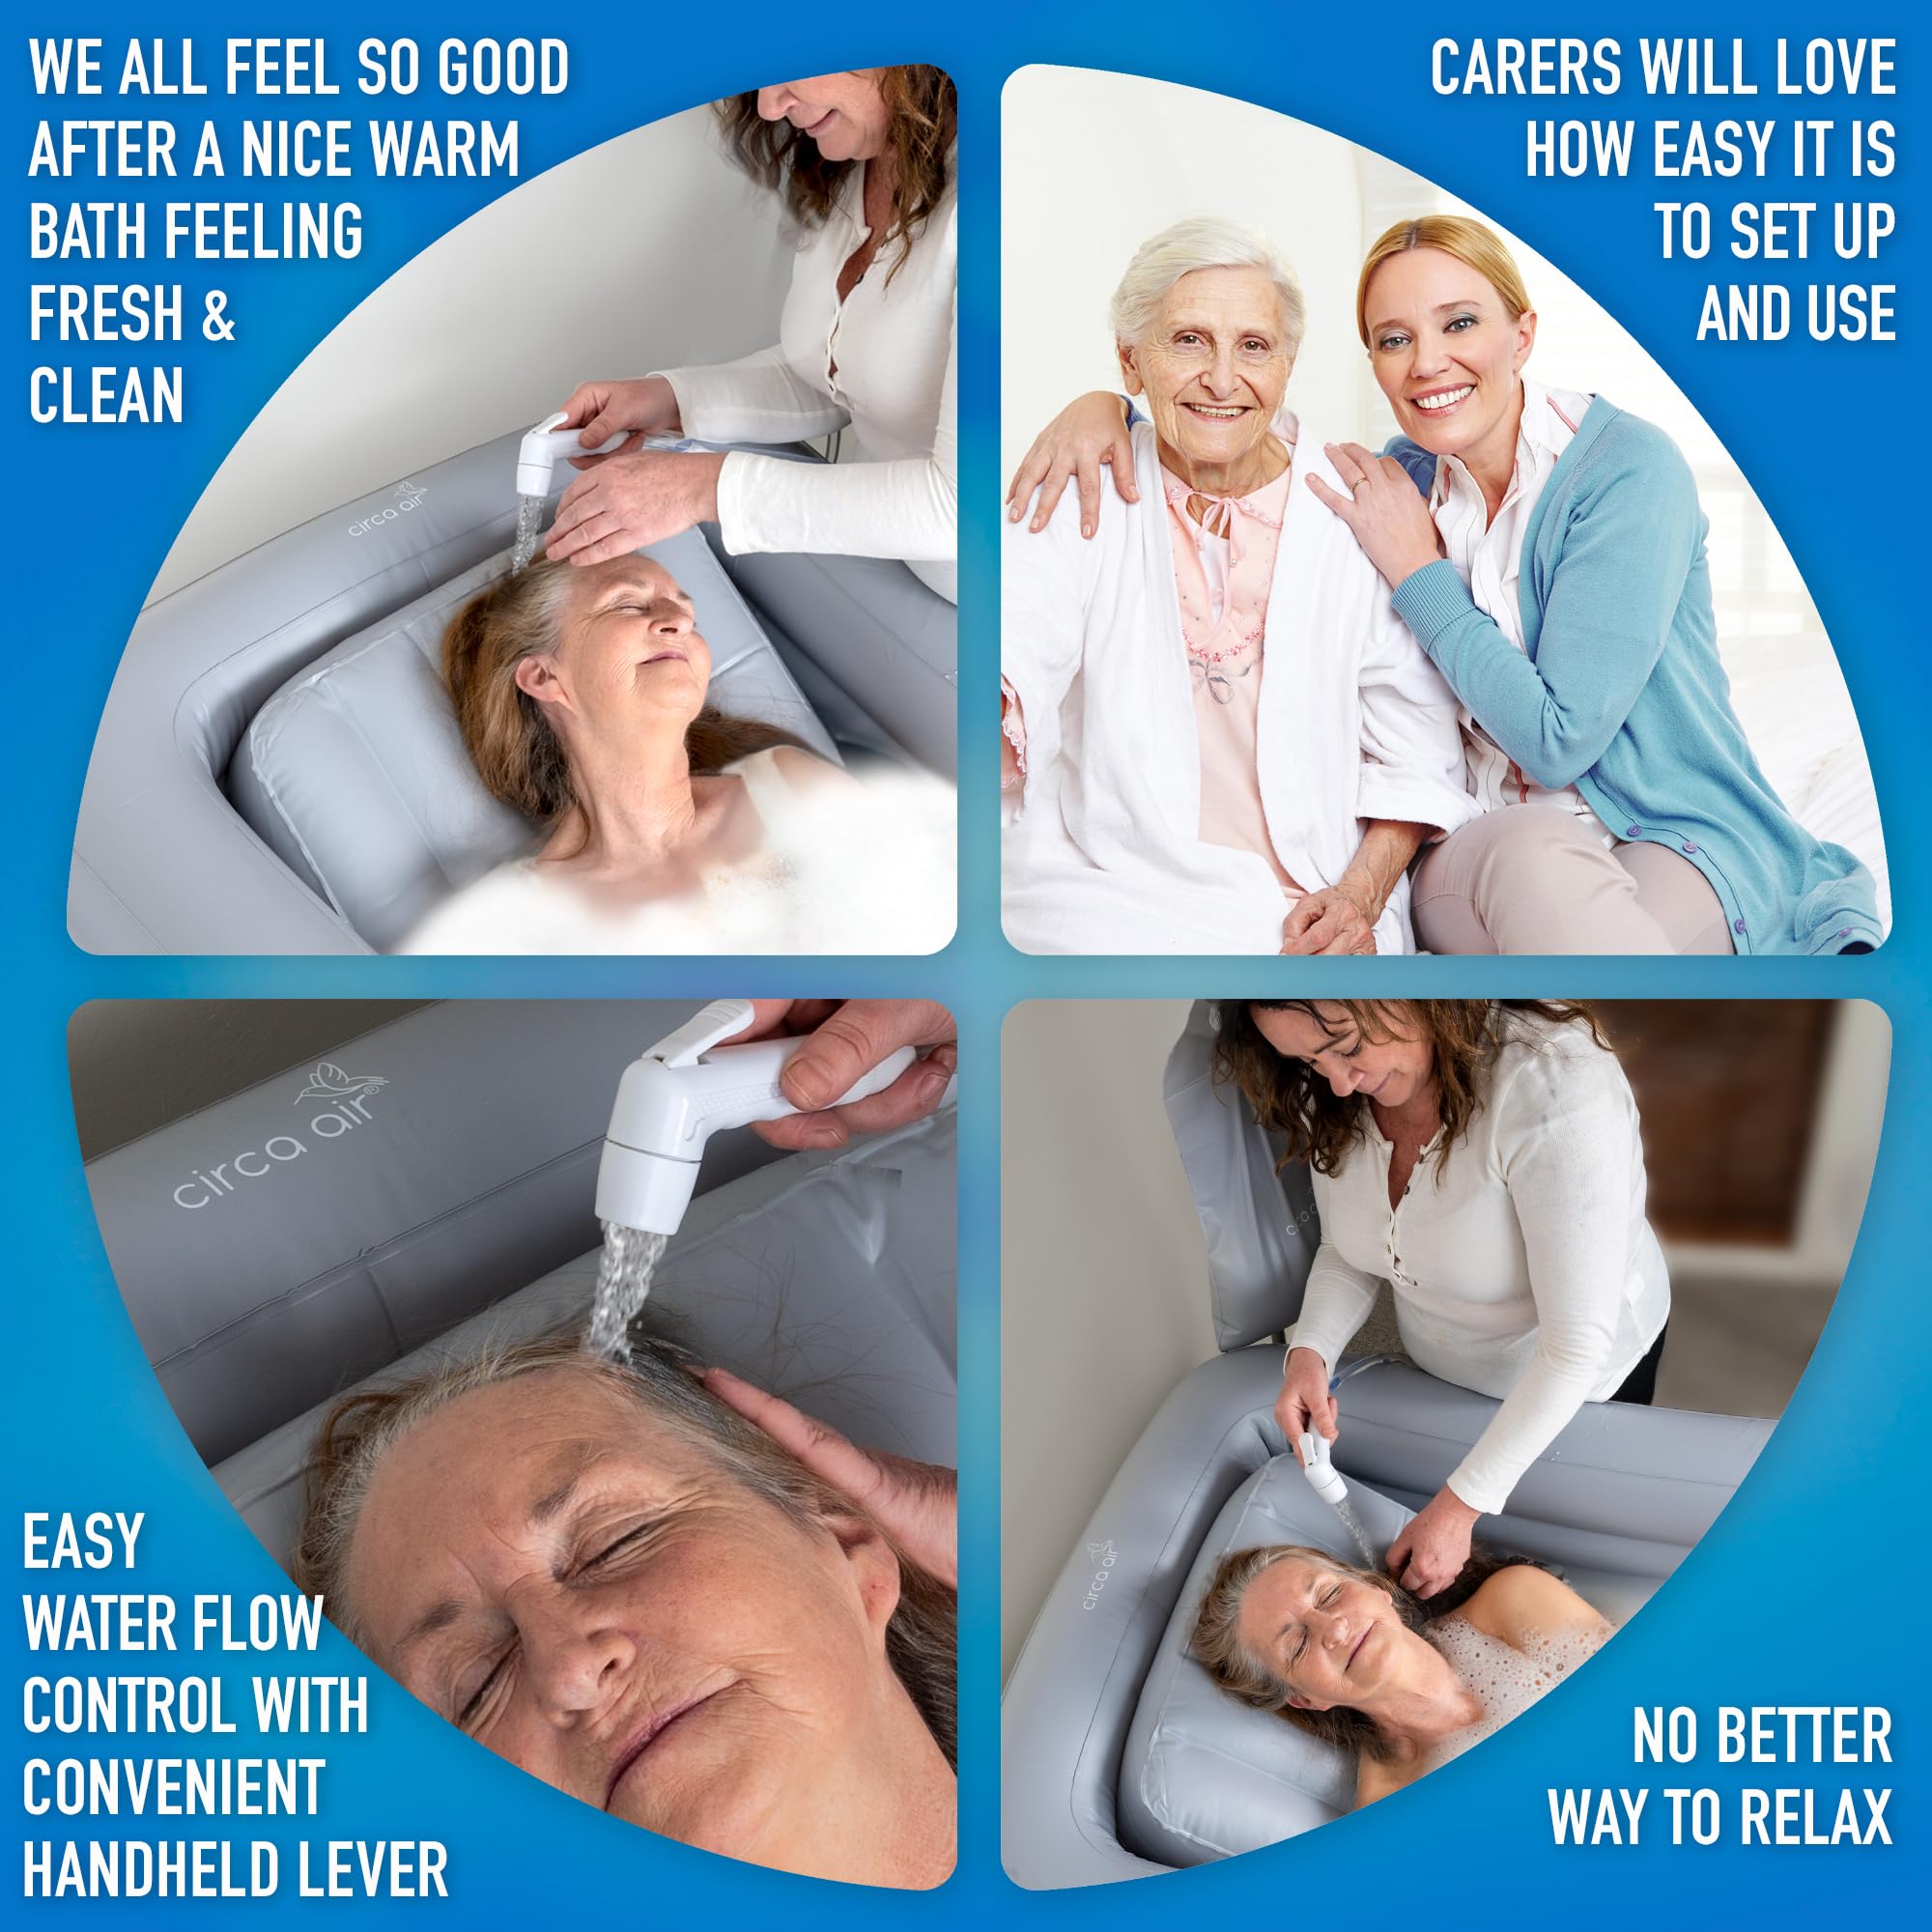 Circa Air Portable Bath Tubs Adults - Medical Inflatable Tub for Bedridden, Handicap, Elderly, Disabled Patients, Collapsible Bathtub System for Elderly Care, Full Bodywash & Hair Washing in Bed